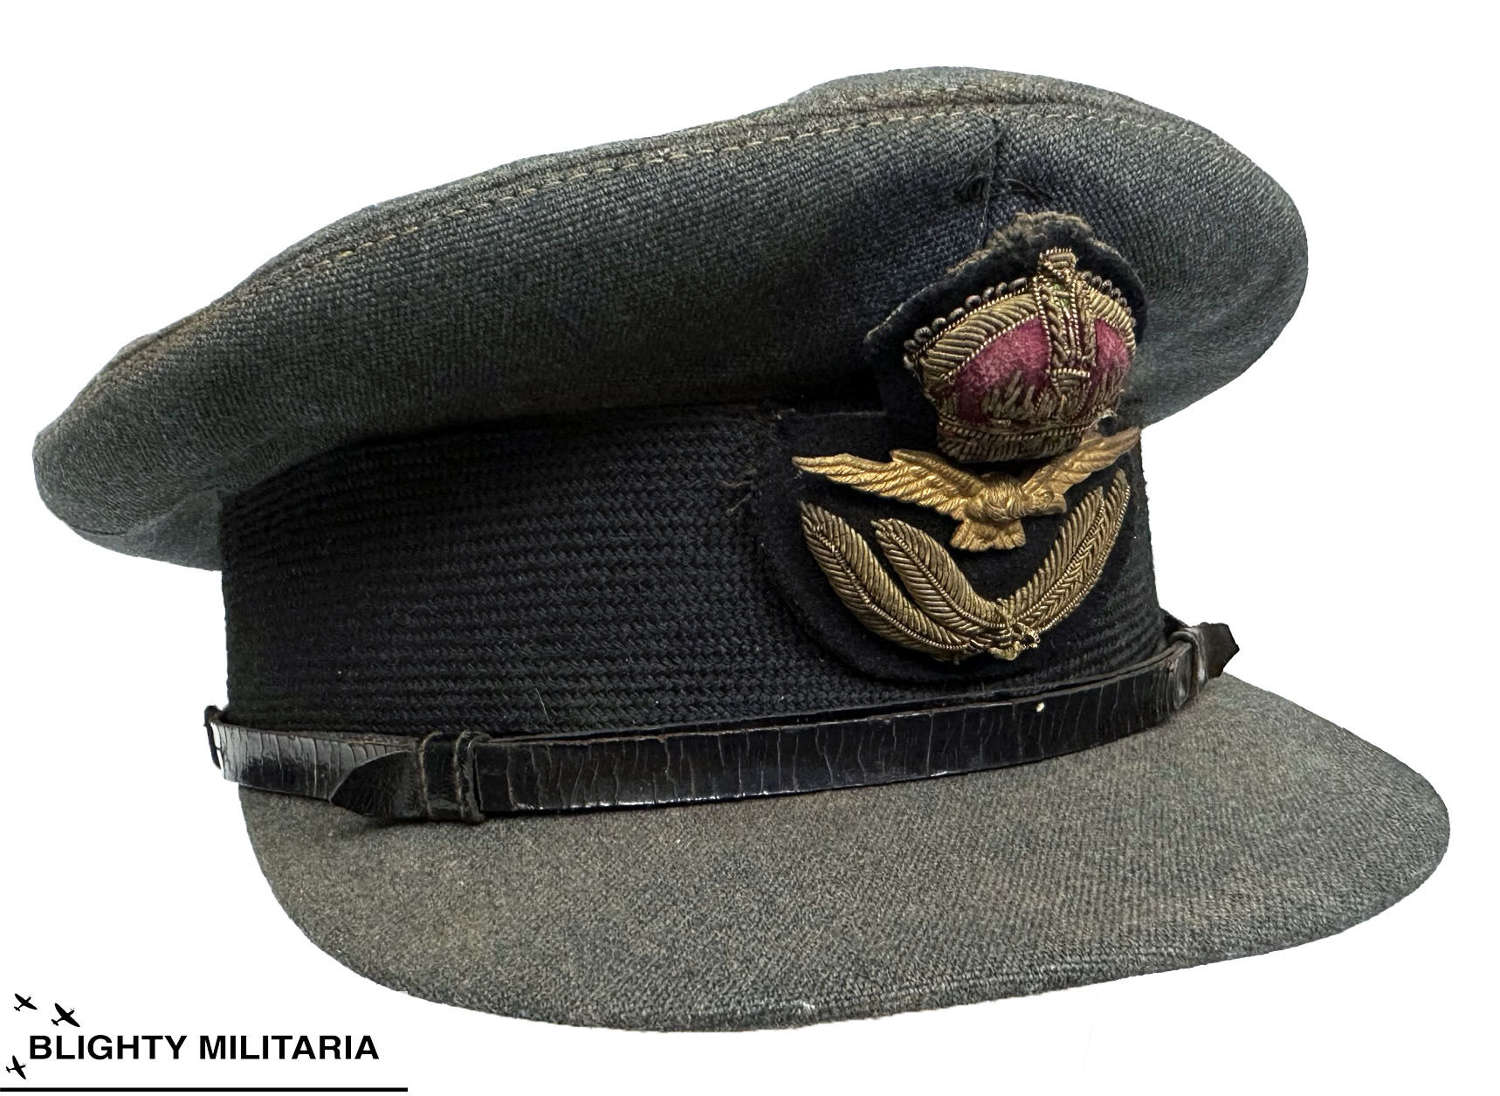 Original Early WW2 Attributed RAF Officer's Peaked Cap